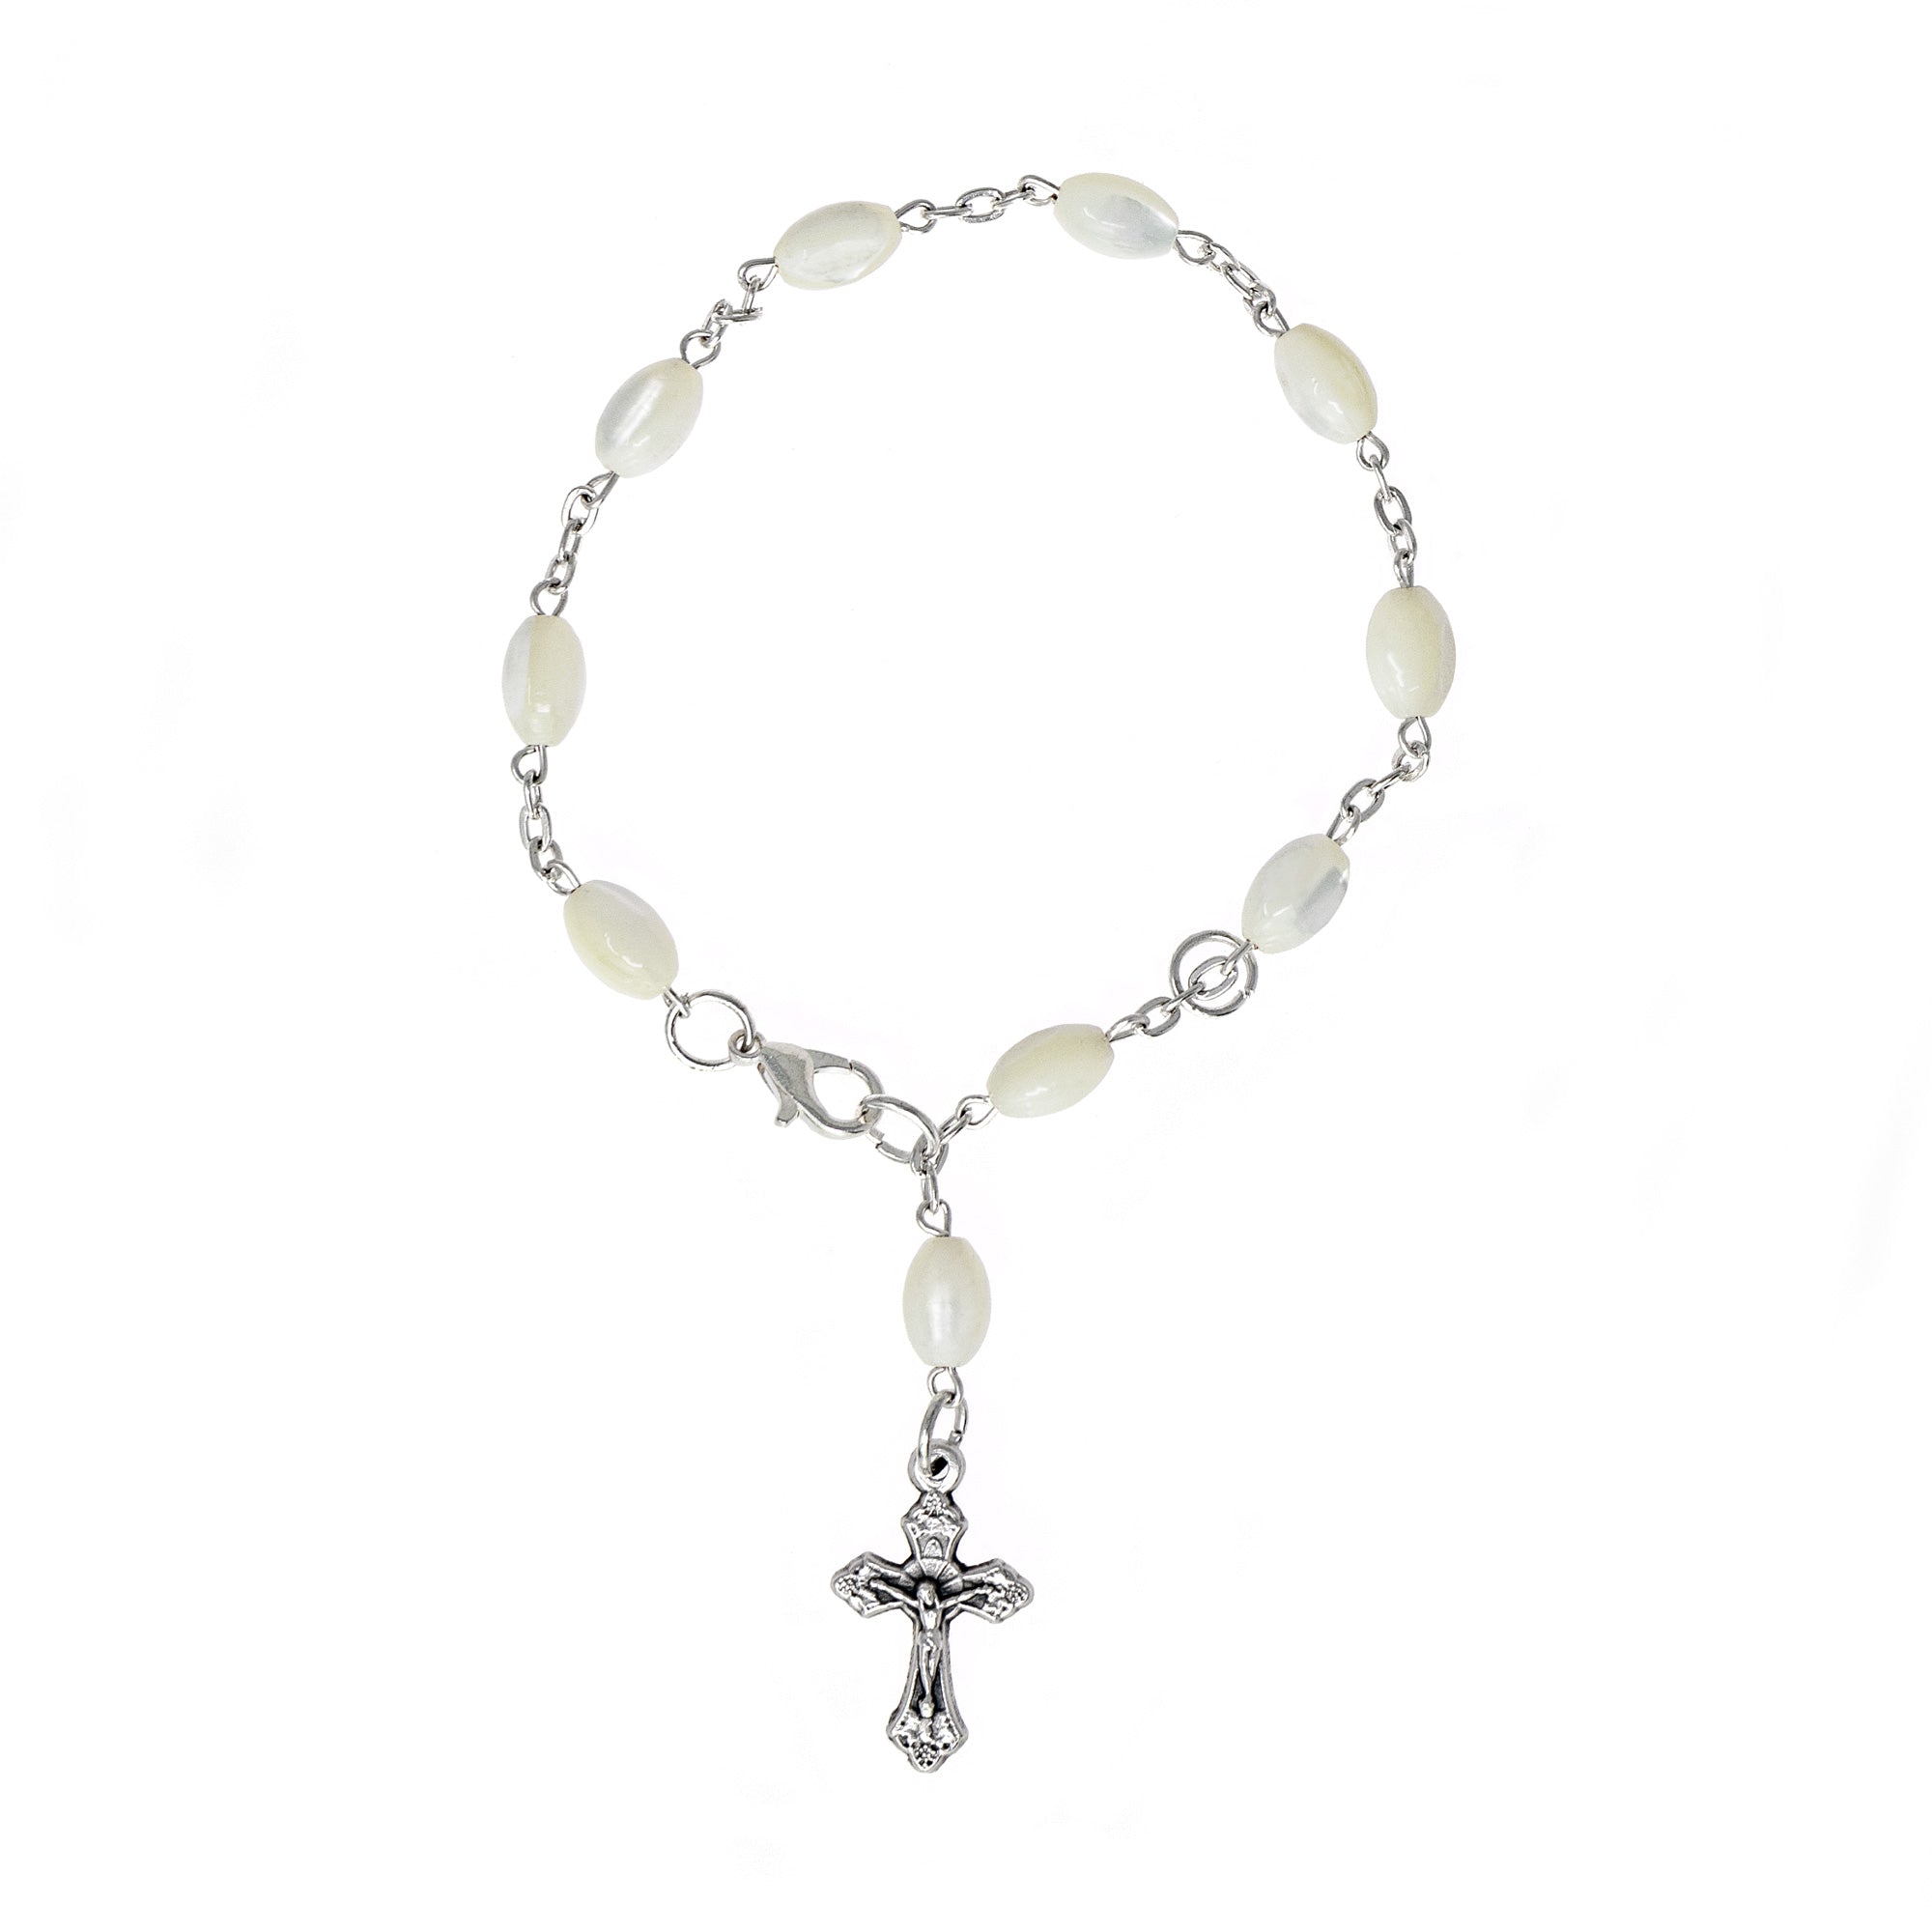 Mother of Pearl One Decade Catholic Rosary Charm Bracelet with Crucifix Cross Pendant Charm